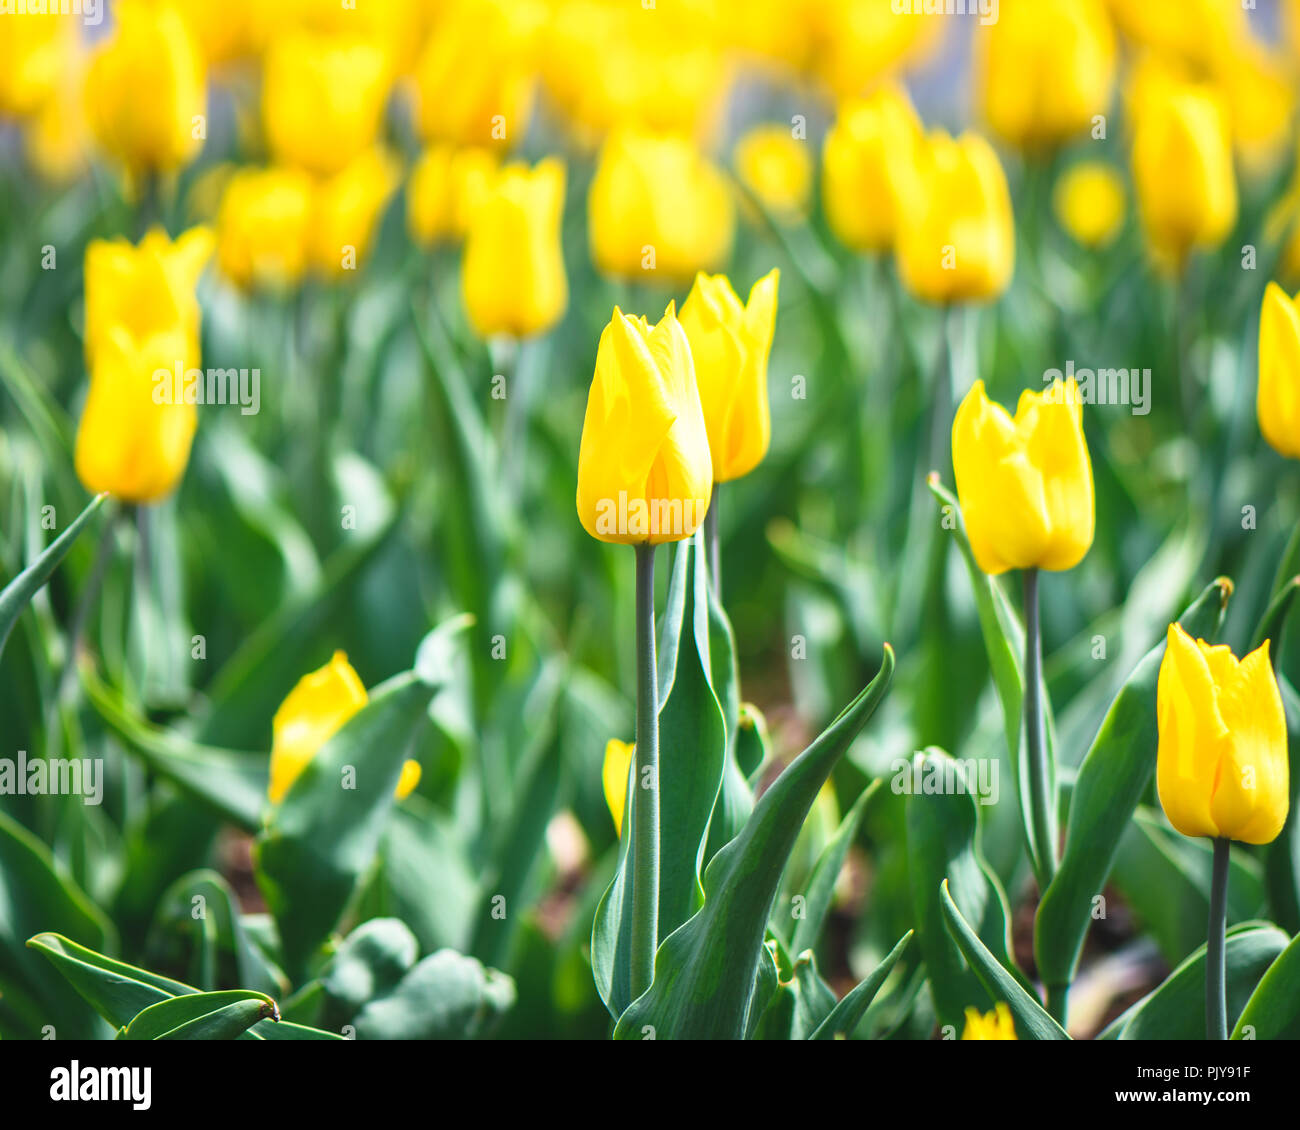 Closeup Of Some Bright Yellow Tulips With A Nice Yellow And Green Bokeh Stock Photo